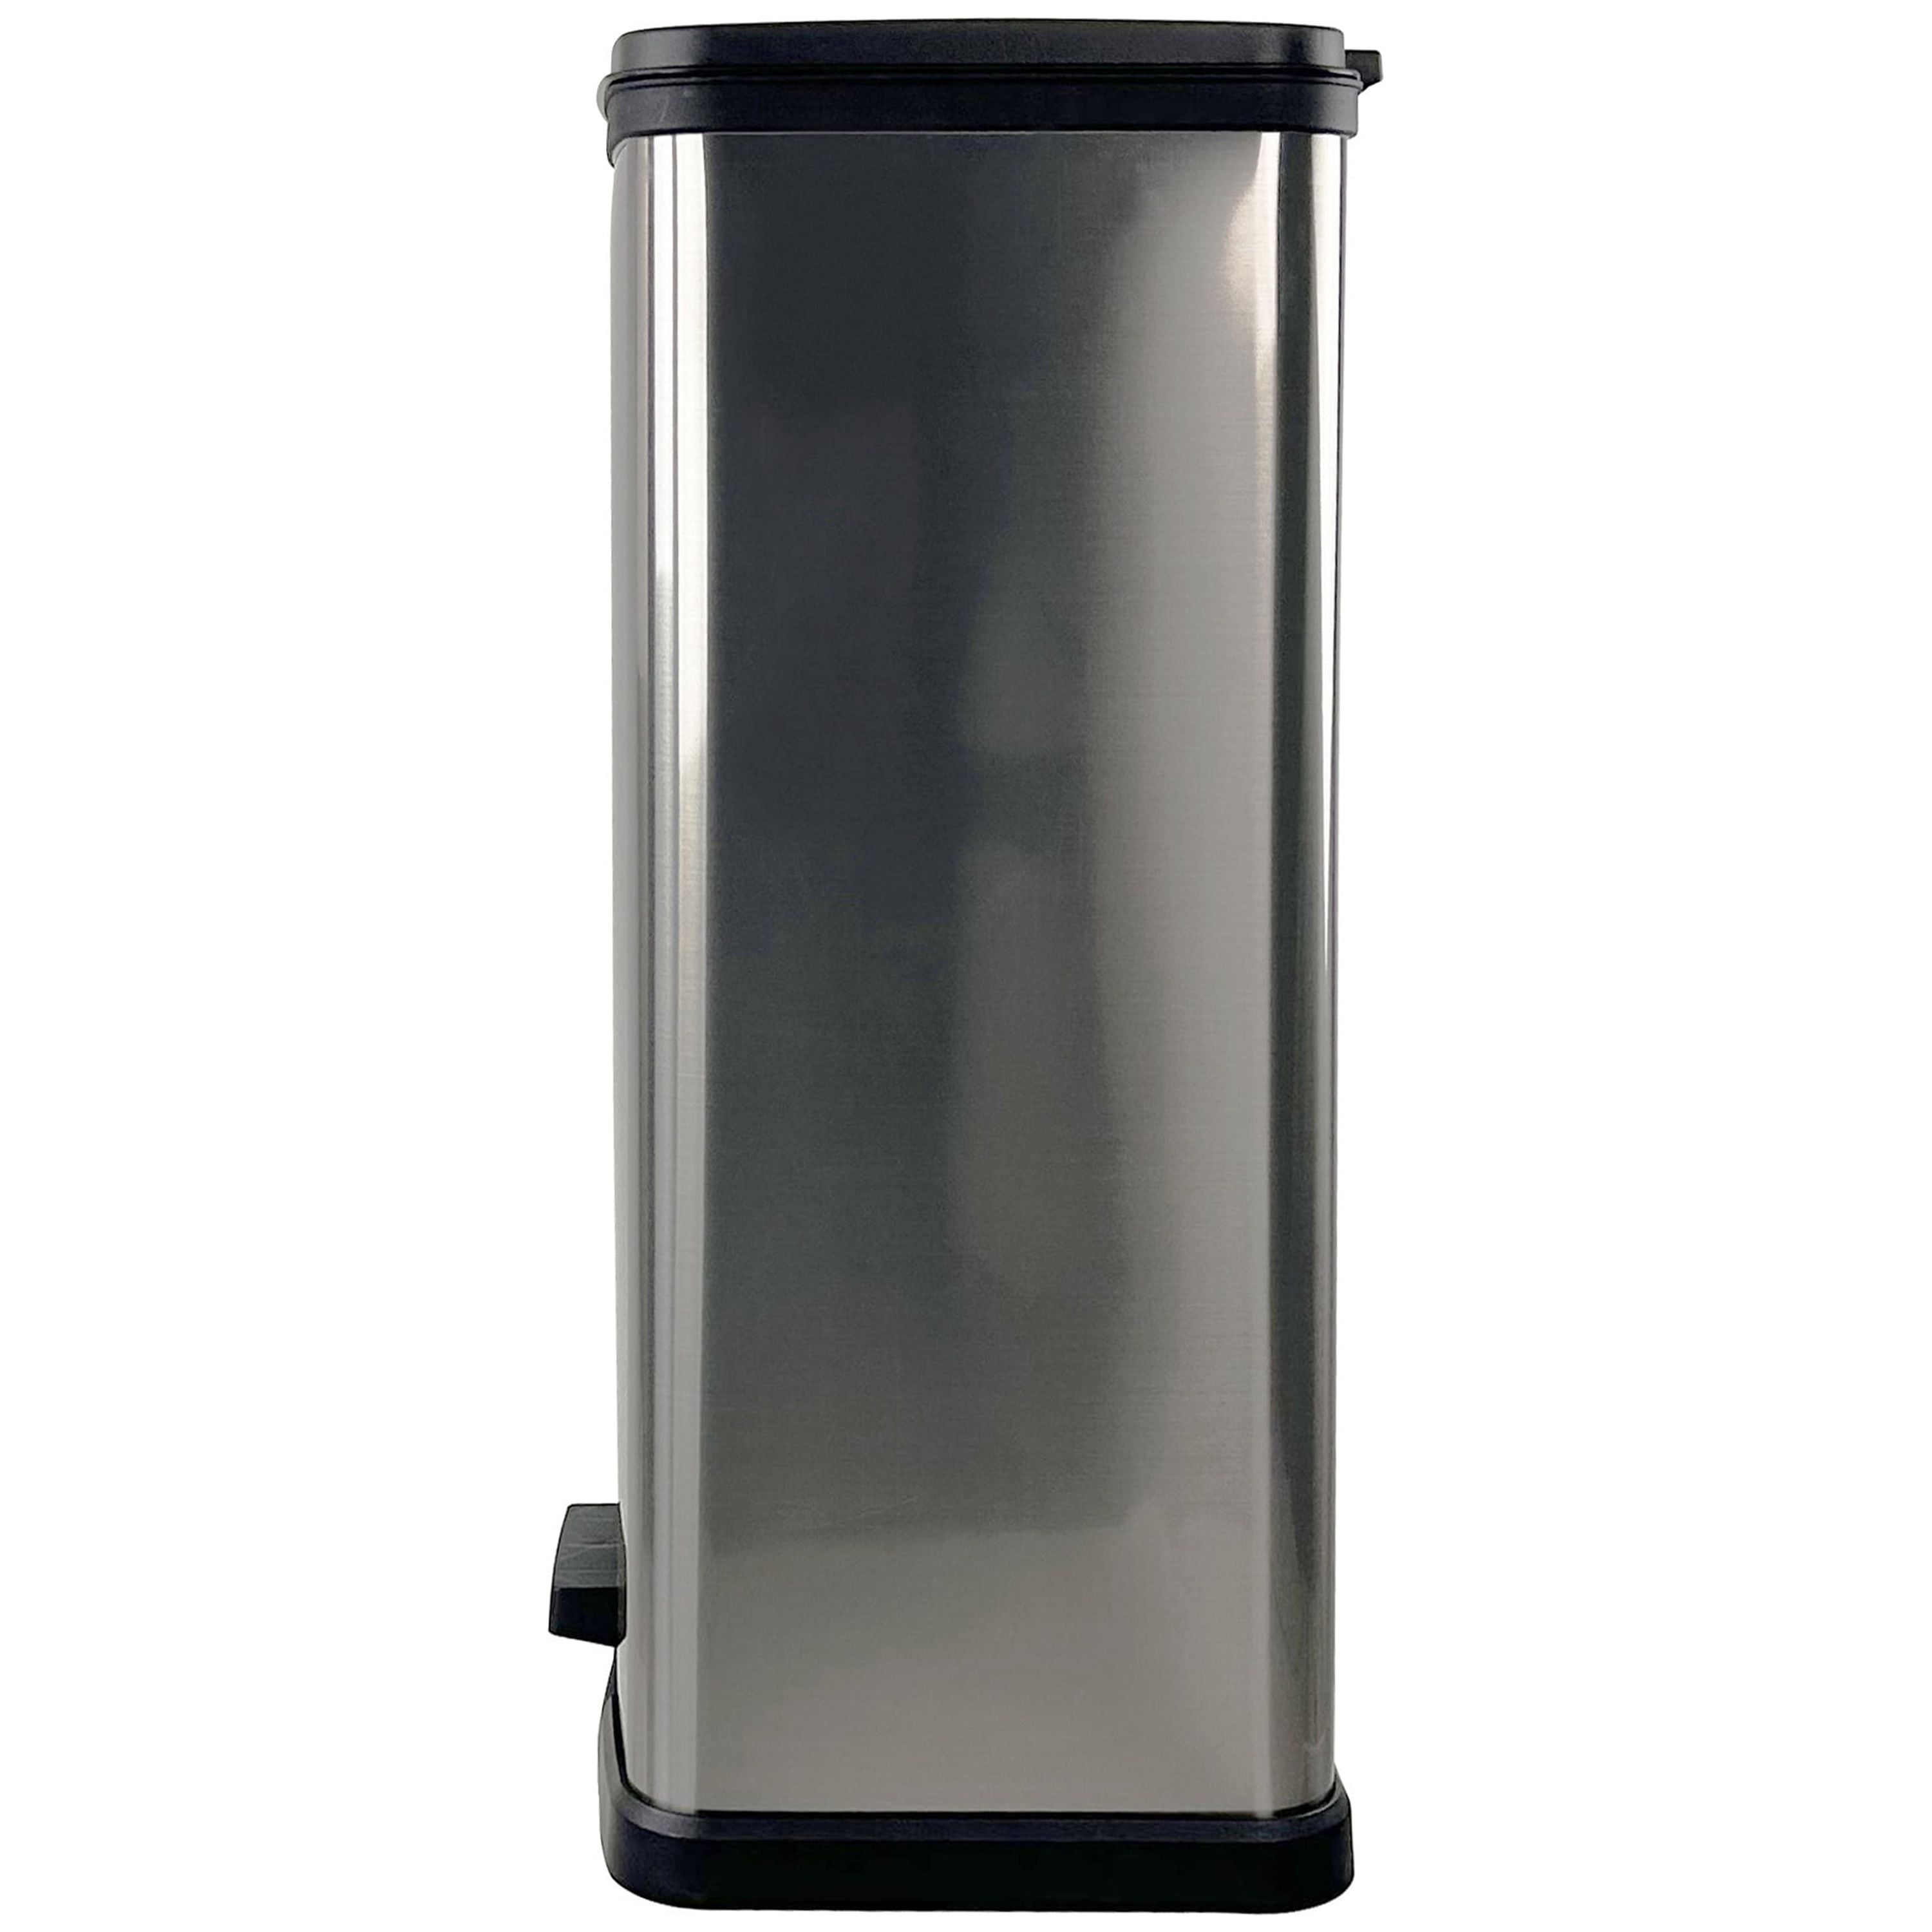 Mainstays 13 gal Plastic Swing Top Lid Kitchen Trash Garbage Can, Gray 